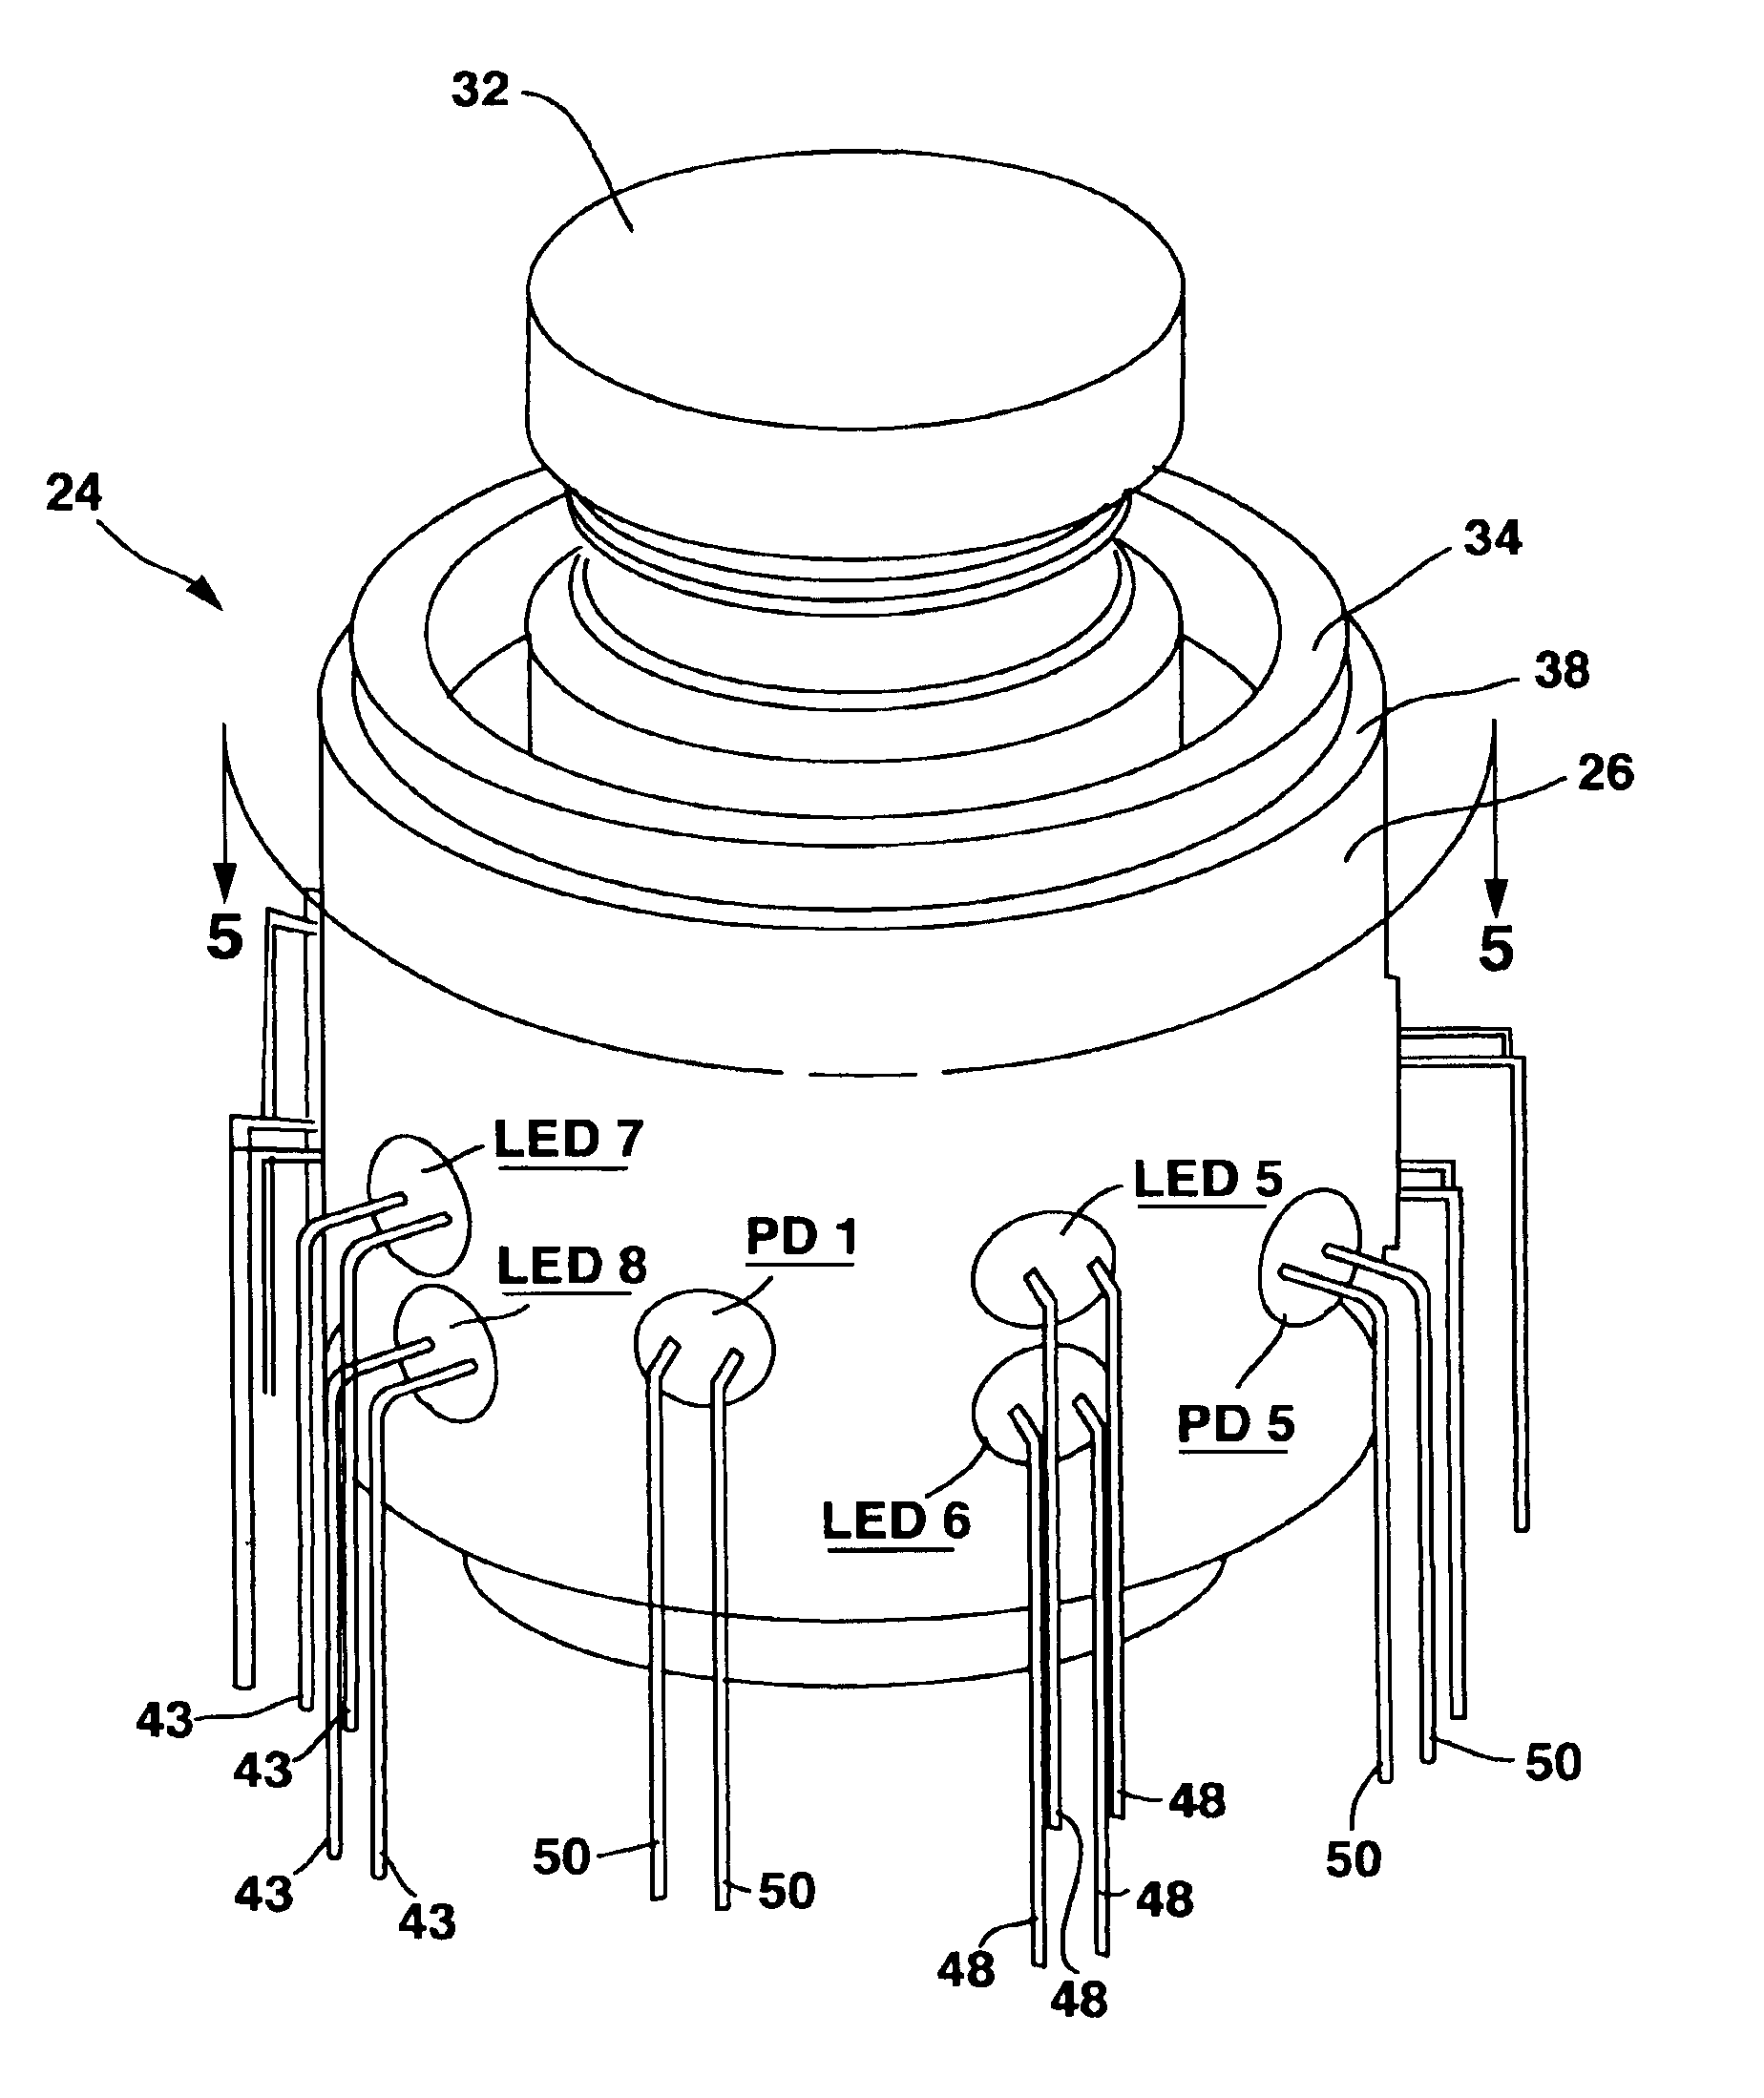 Instrument with colorimeter and sensor inputs for interfacing with a computer